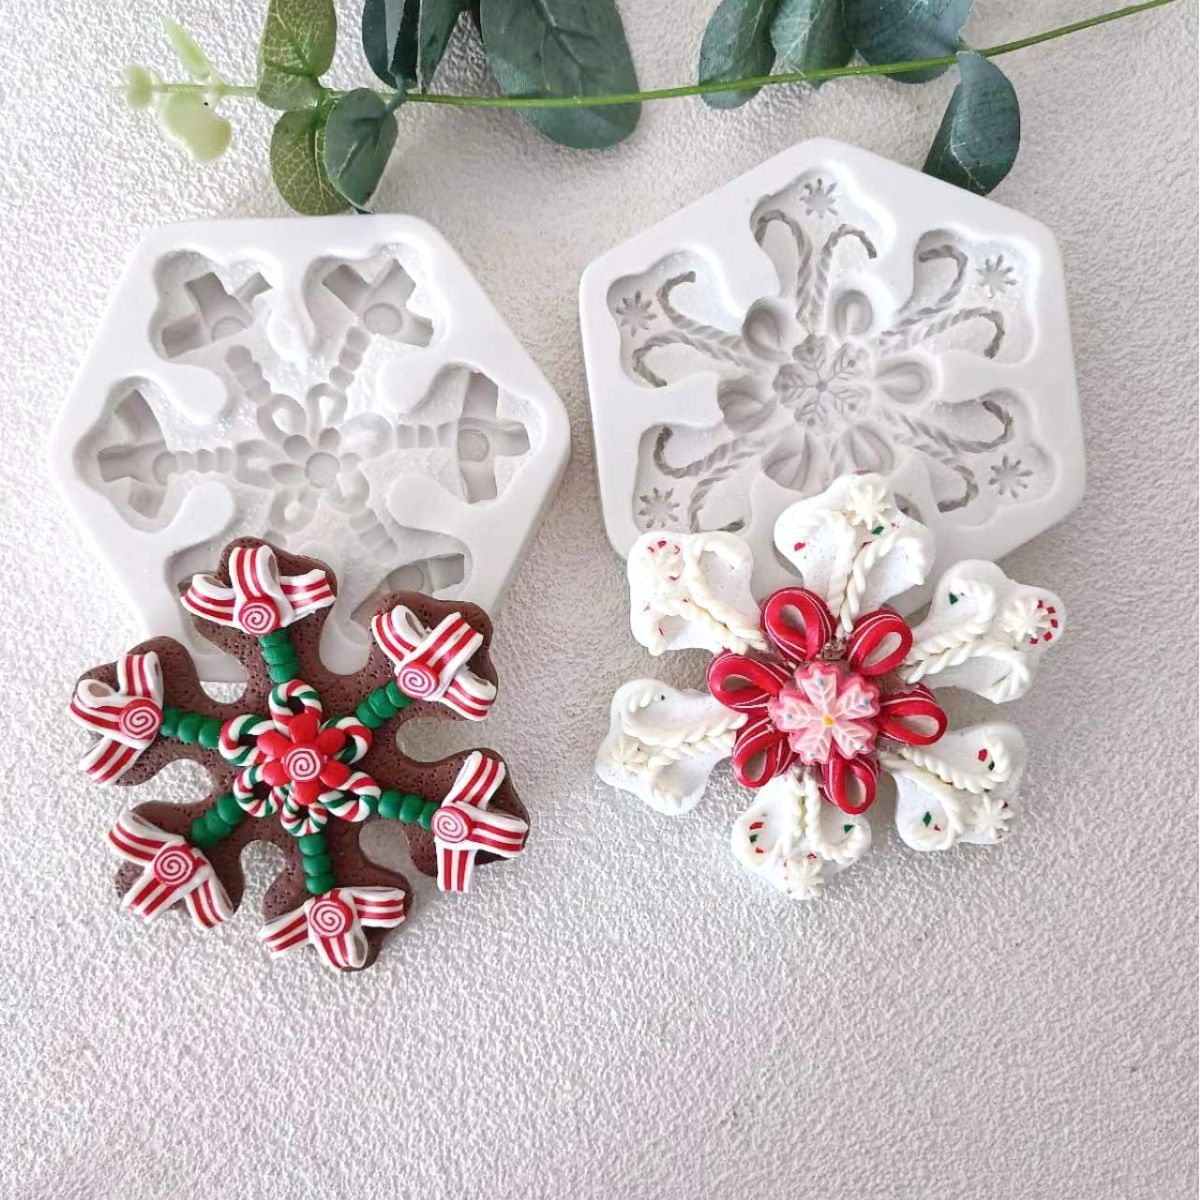 2 Pcs Snowflake Chocolate Molds Silicone Large for Winter Cake Decoration  Candy Making Supplies Christmas Snowflake Decoration Party Cake Decoration  Baking Mold 